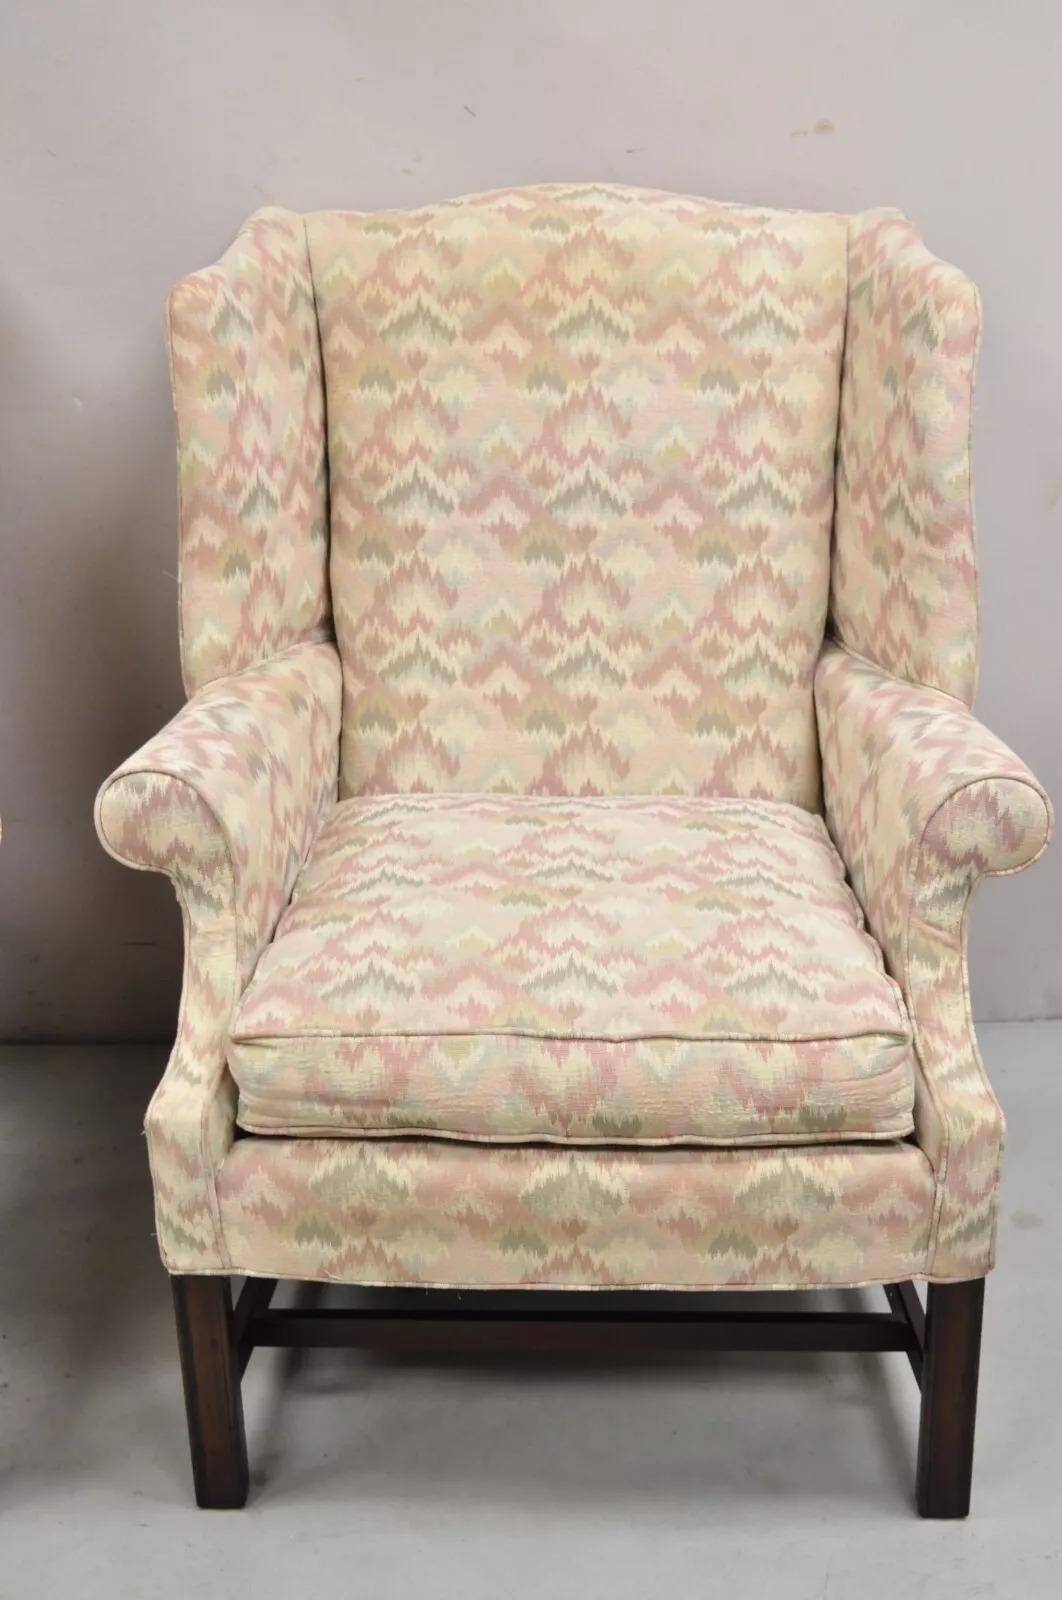 Fabric Frederick Edward Georgian Style Upholstered Wingback Lounge Arm Chairs - a Pair For Sale